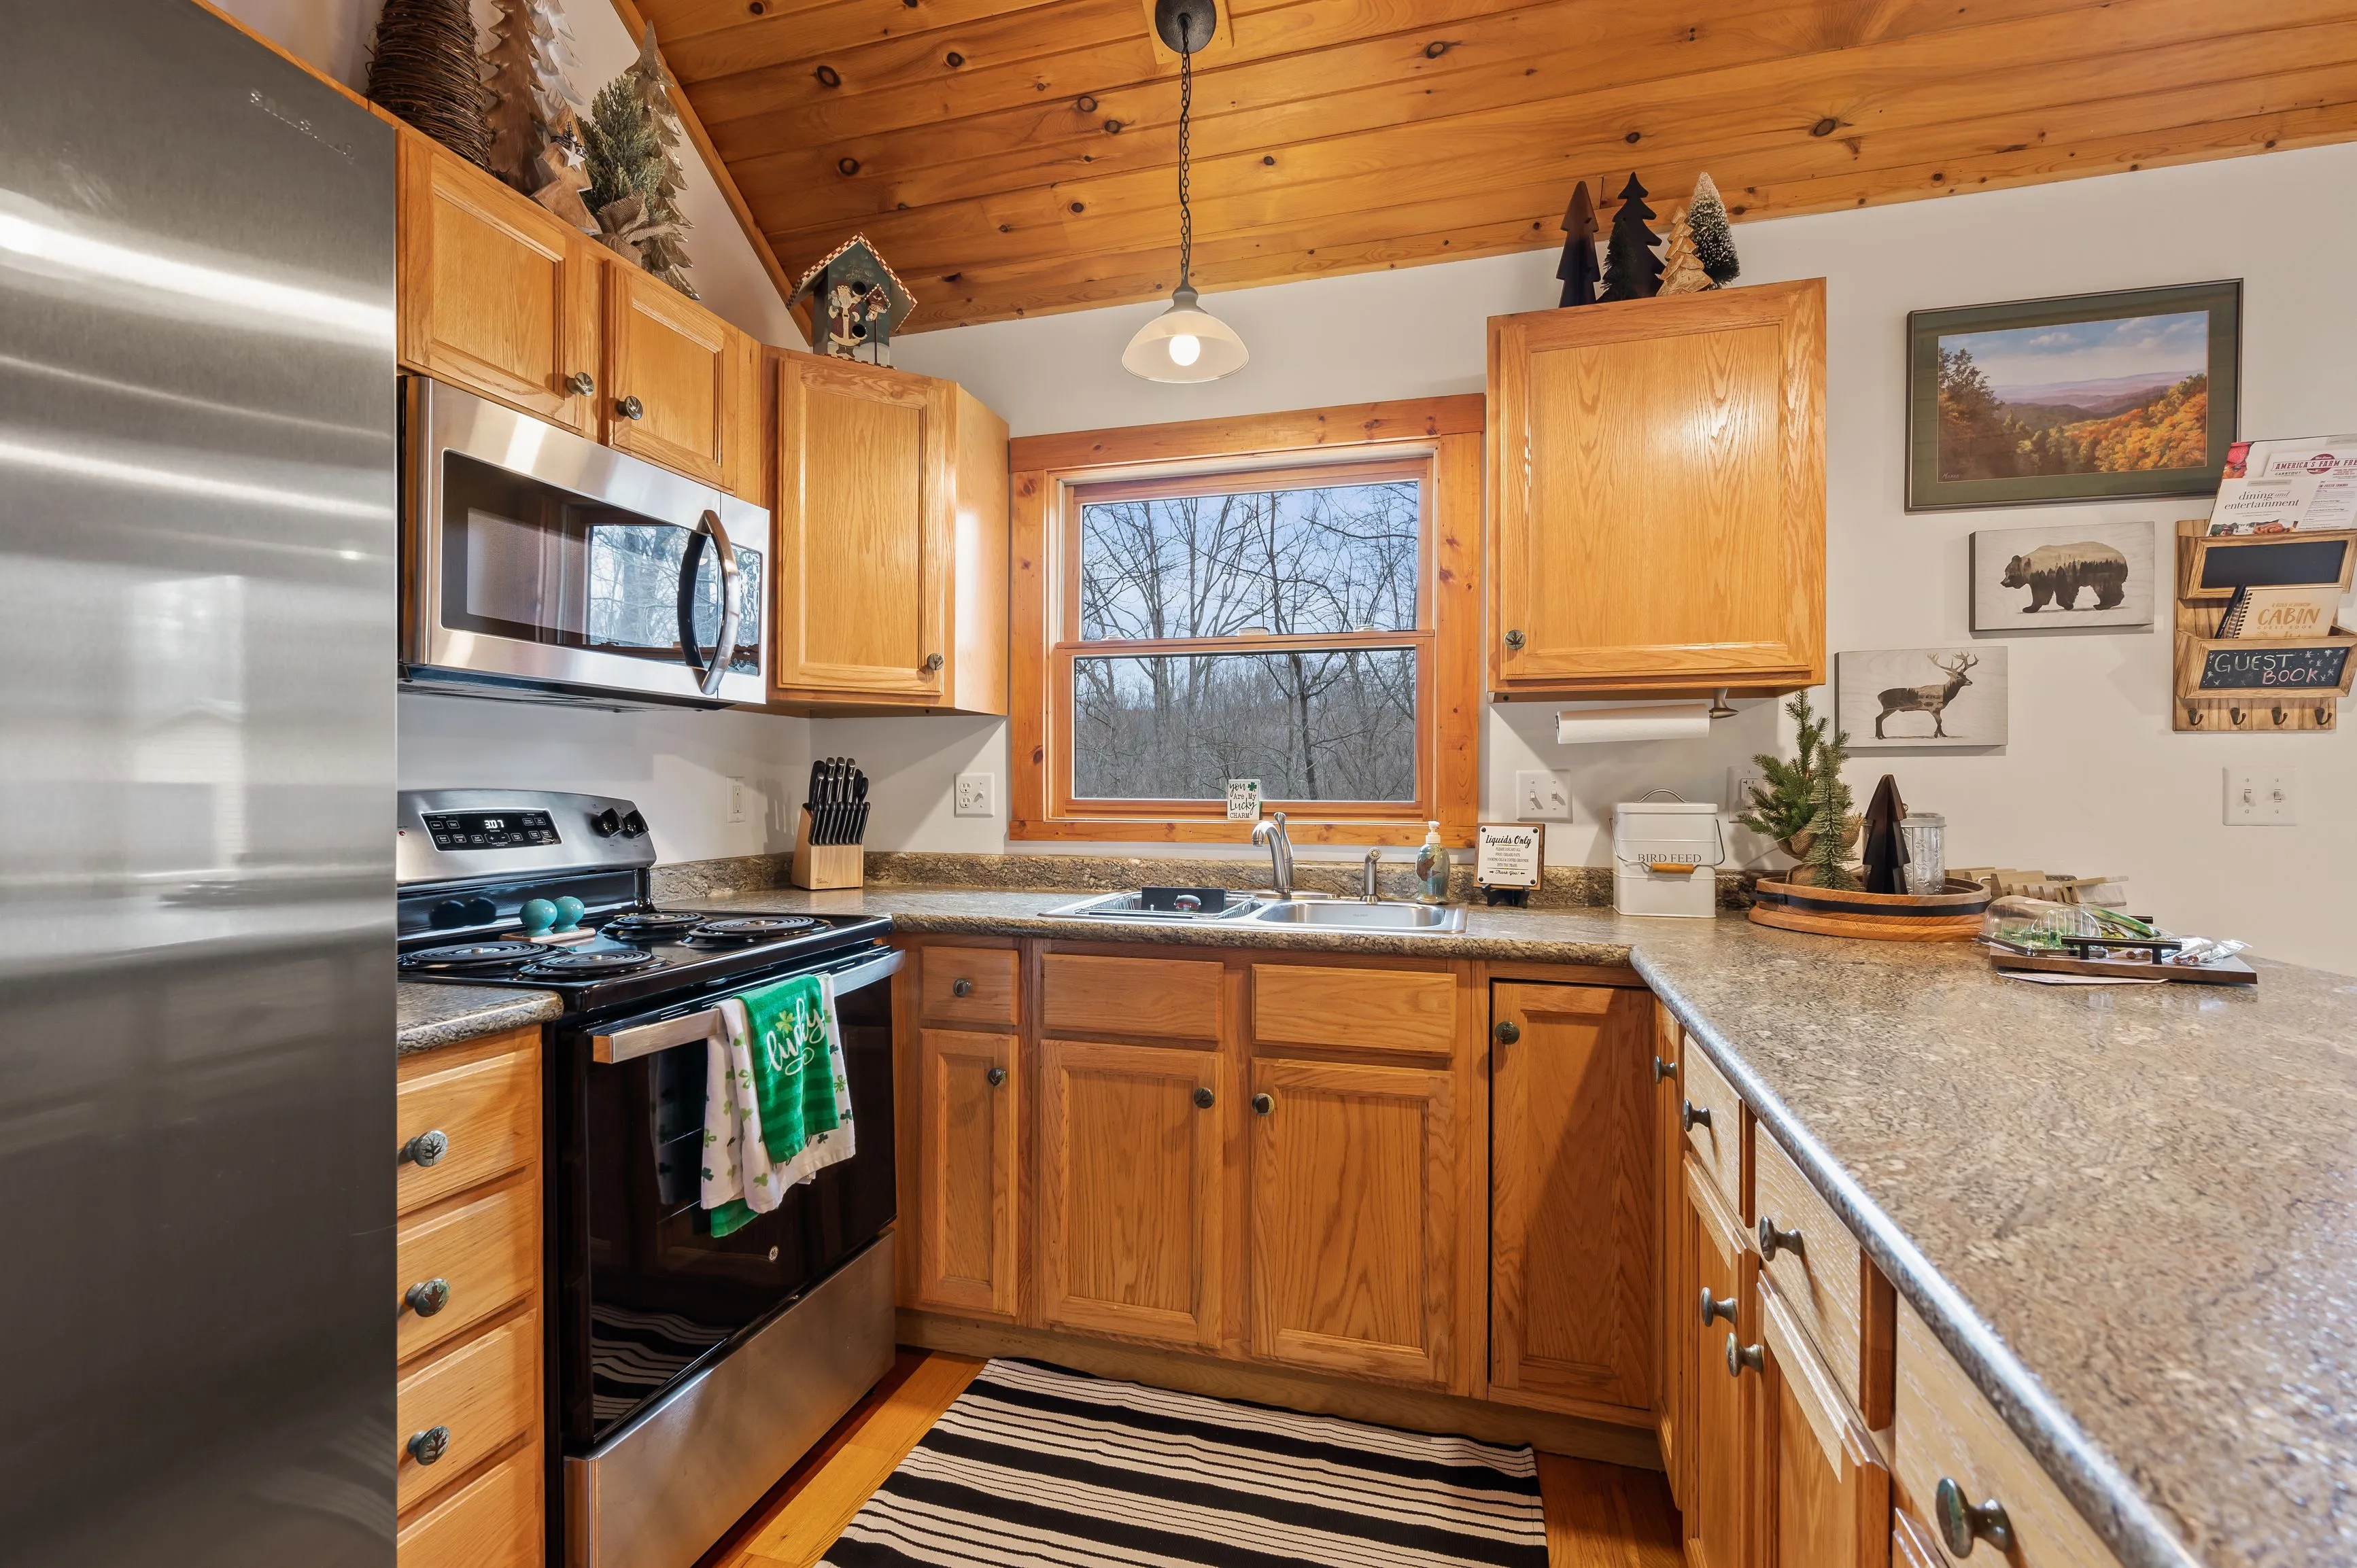 Cozy kitchen interior with wooden cabinets, stainless steel appliances, and a window overlooking trees.